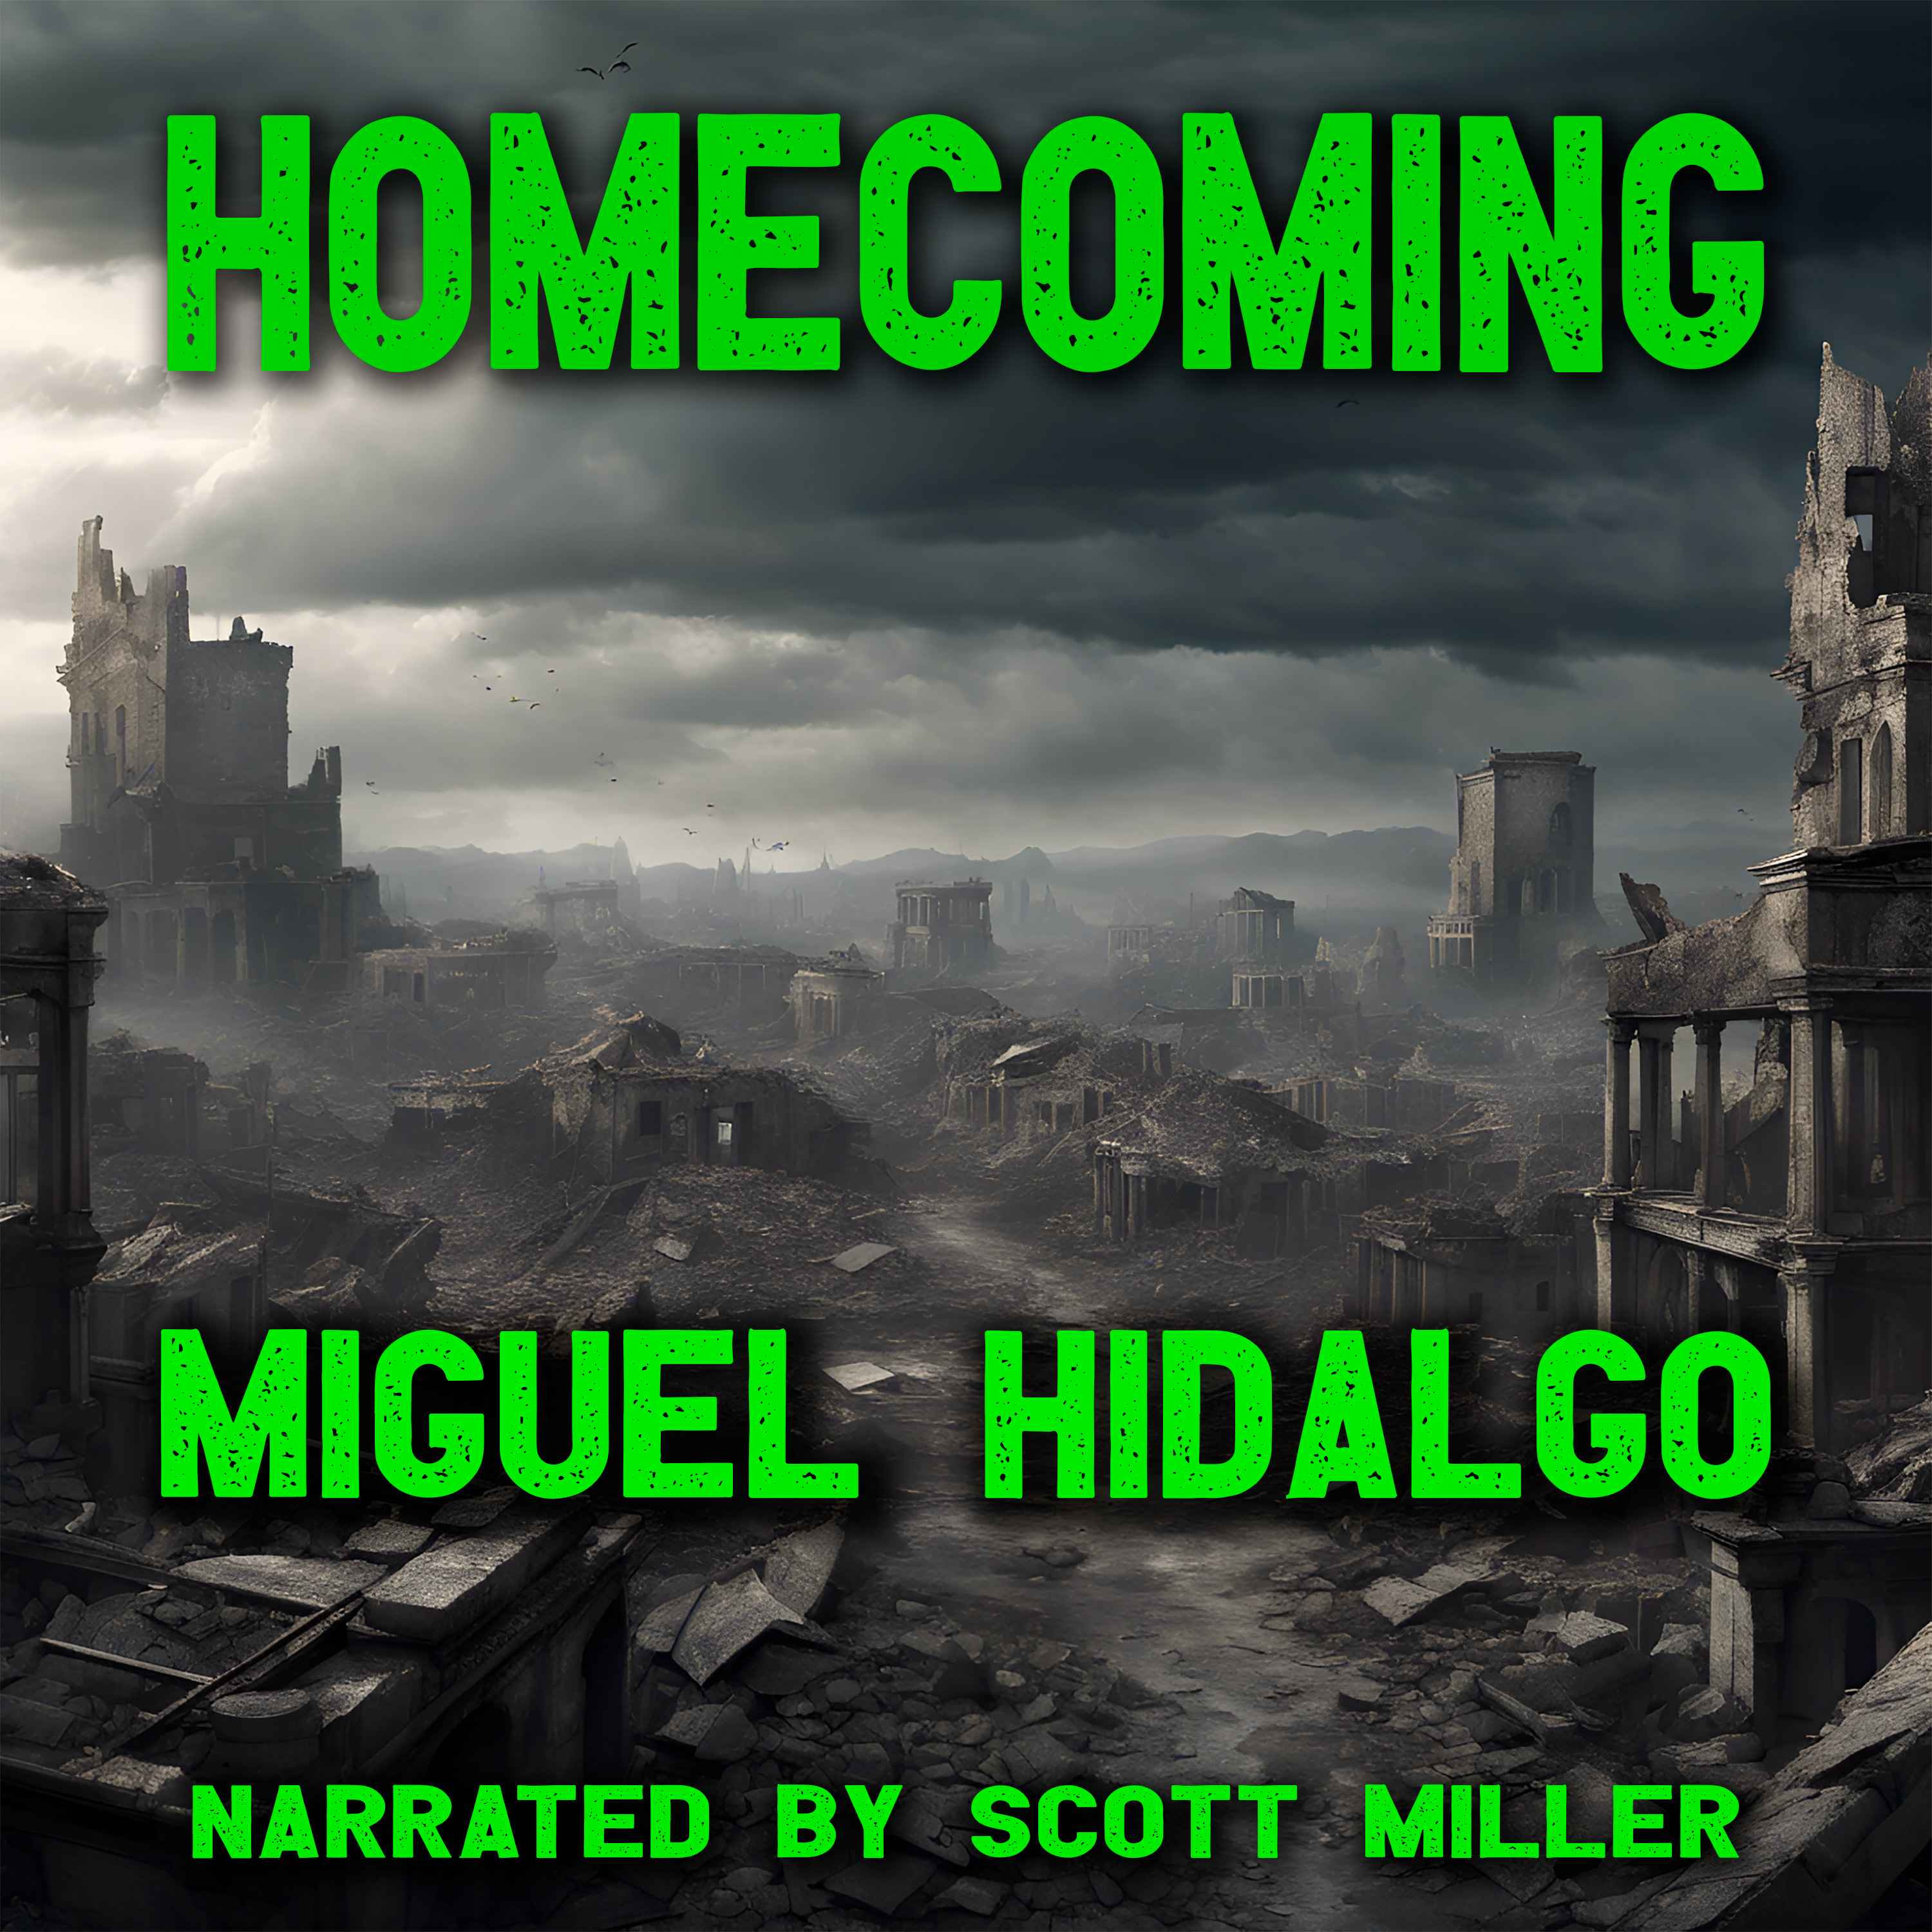 Homecoming by Miguel Hidalgo - 1950s Science Fiction Short Stories